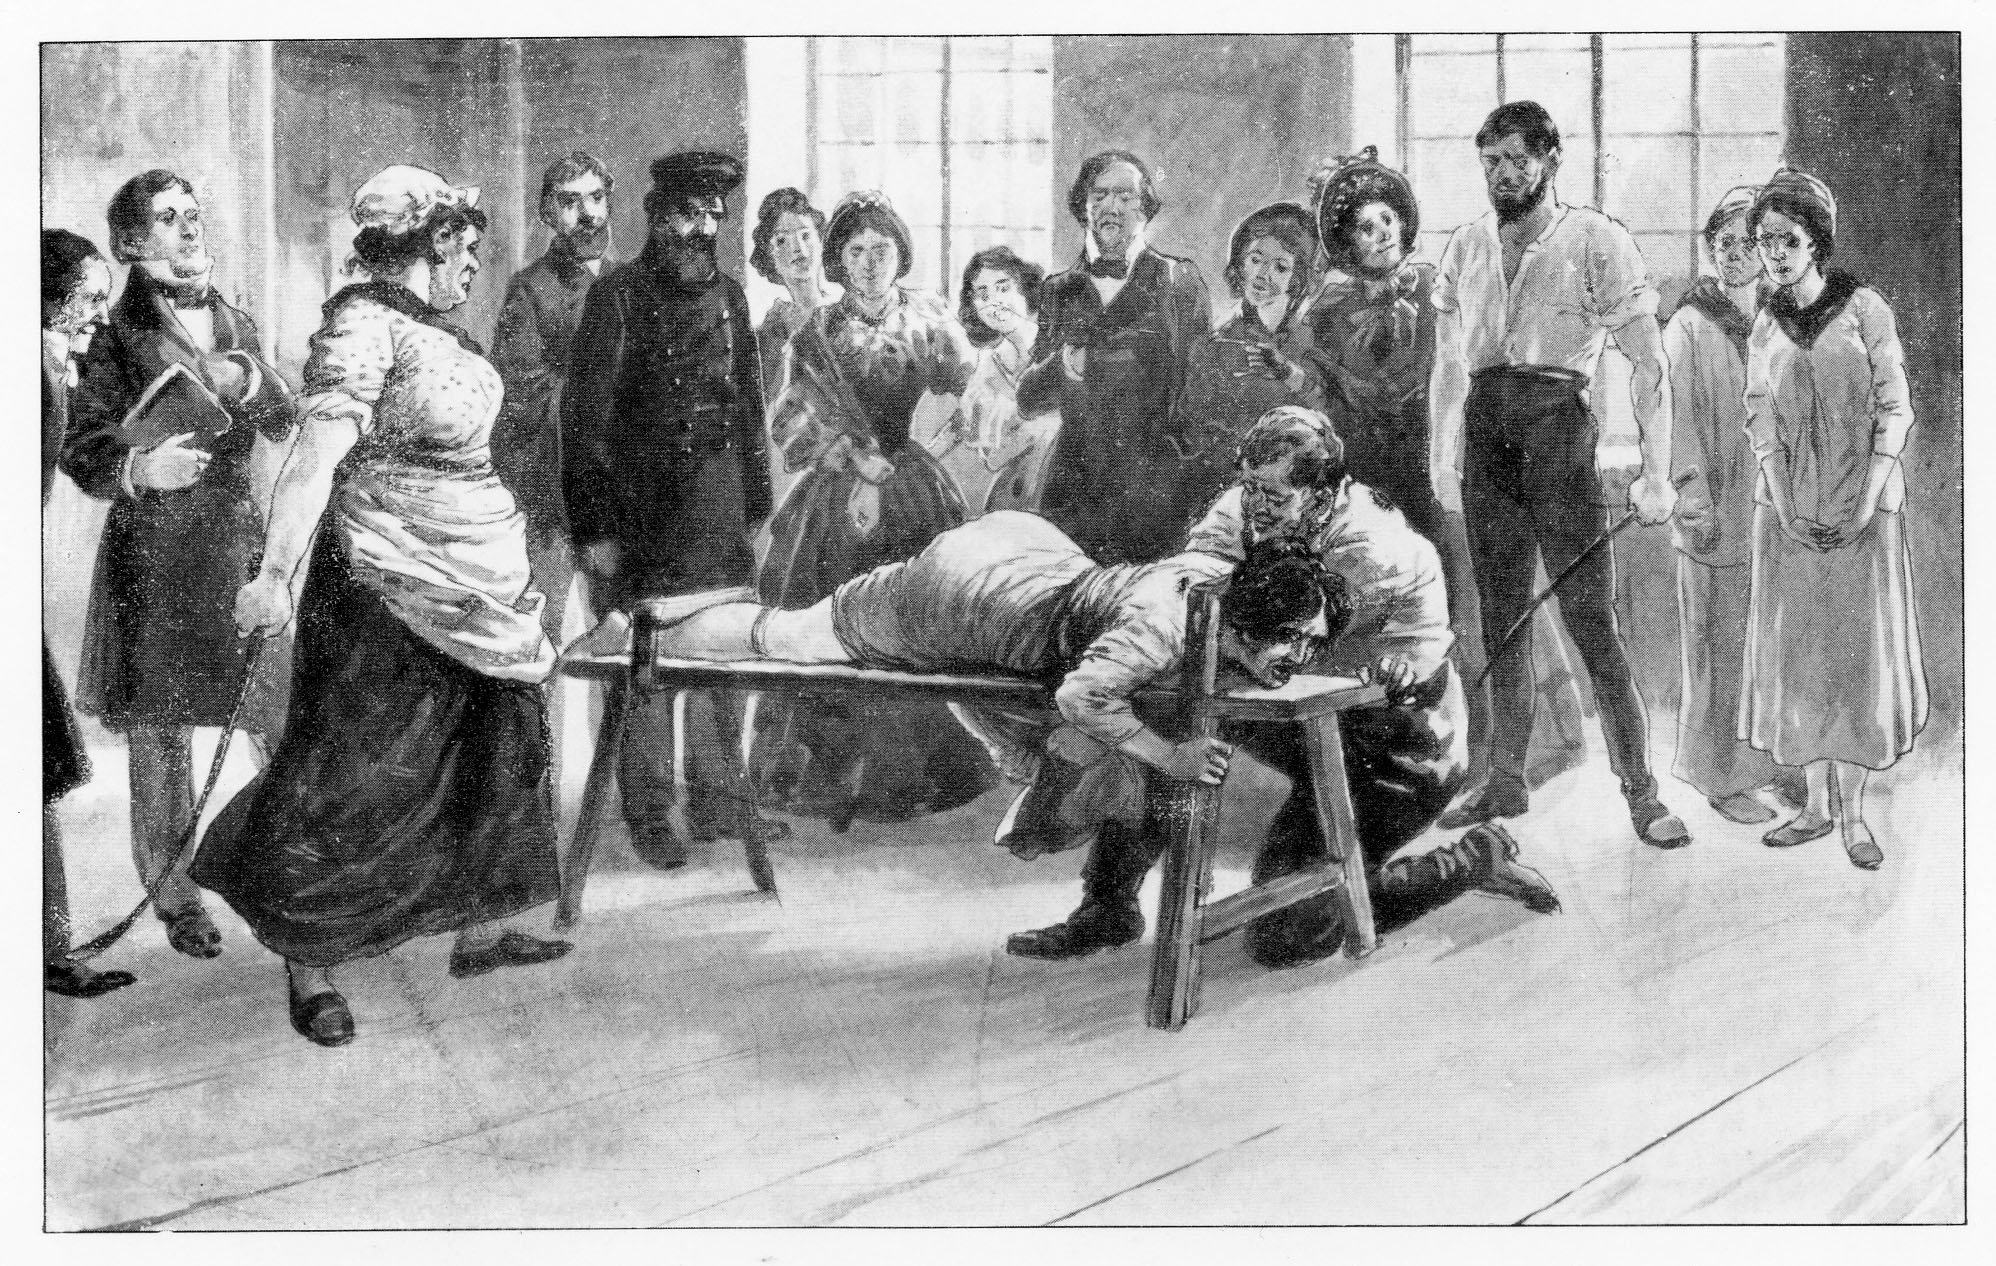 Anonymous, %22Nell in Bridewell%22 Spanking Illustrations_4.jpg